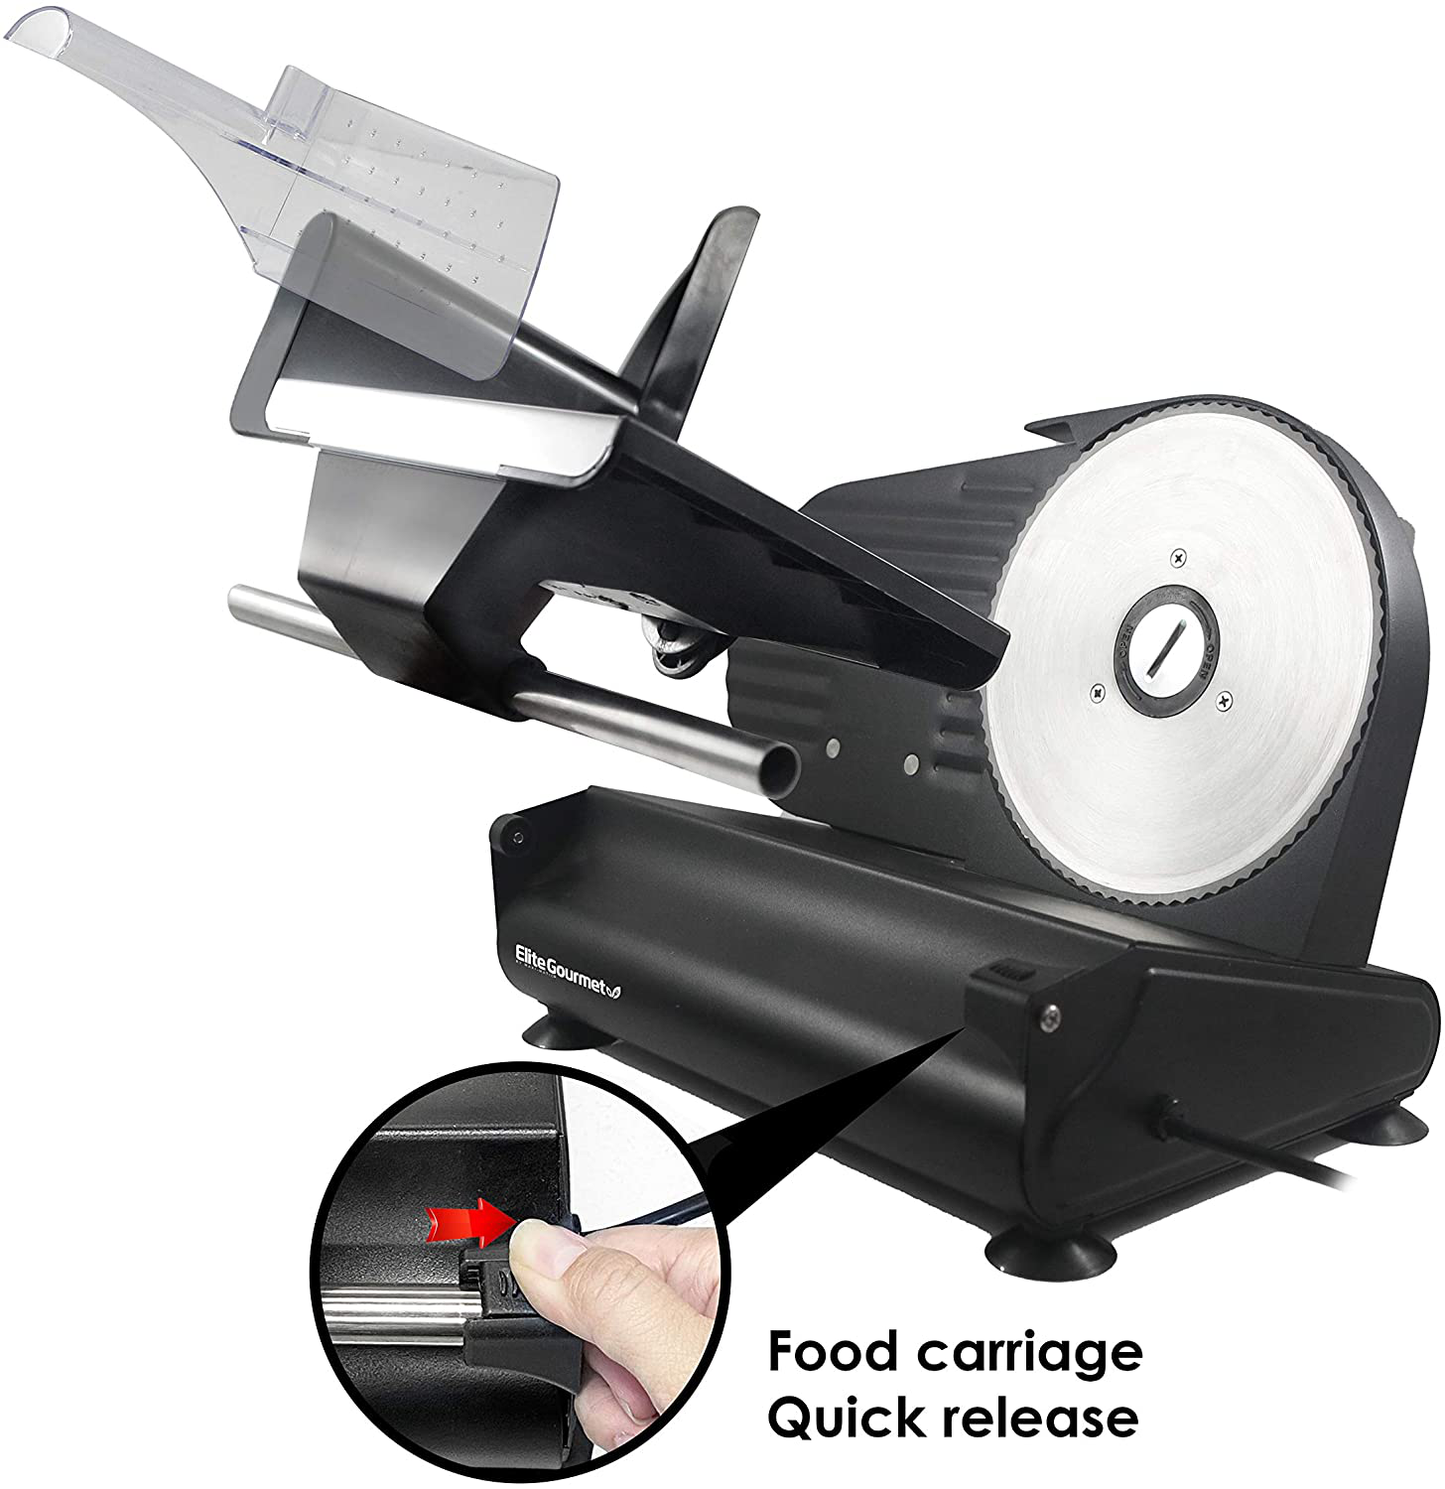 Elite Gourmet Ultimate Precision Electric Deli Food Meat Slicer Removable Stainless Steel Blade, Adjustable Thickness, Ideal for Cold Cuts, Hard Cheese, Vegetables & Bread, 7.5”, Black